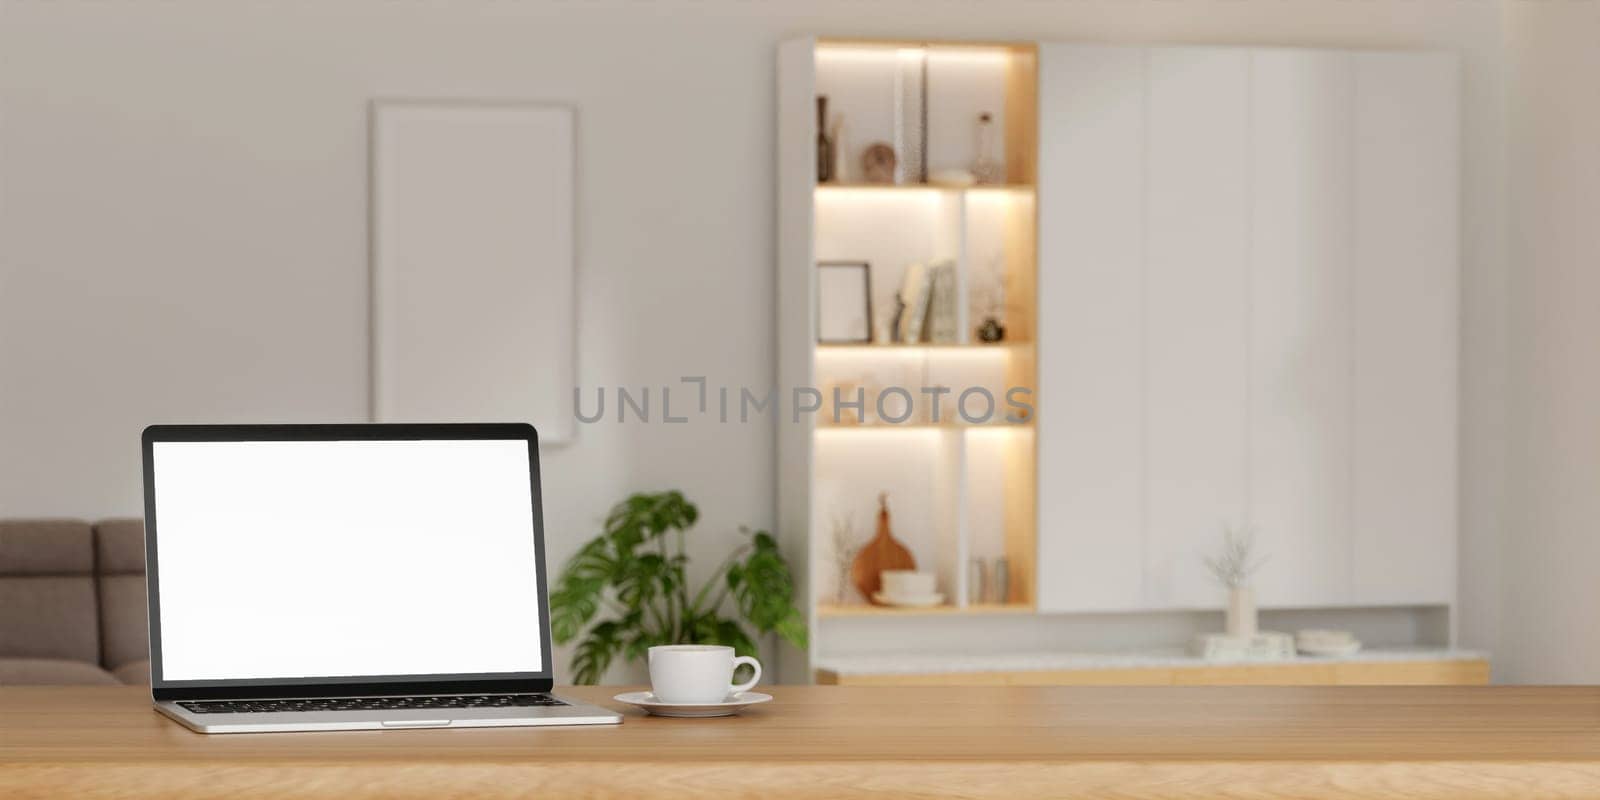 A laptop mockup on the table In minimal living room. on empty white wall background.3d render illustration.